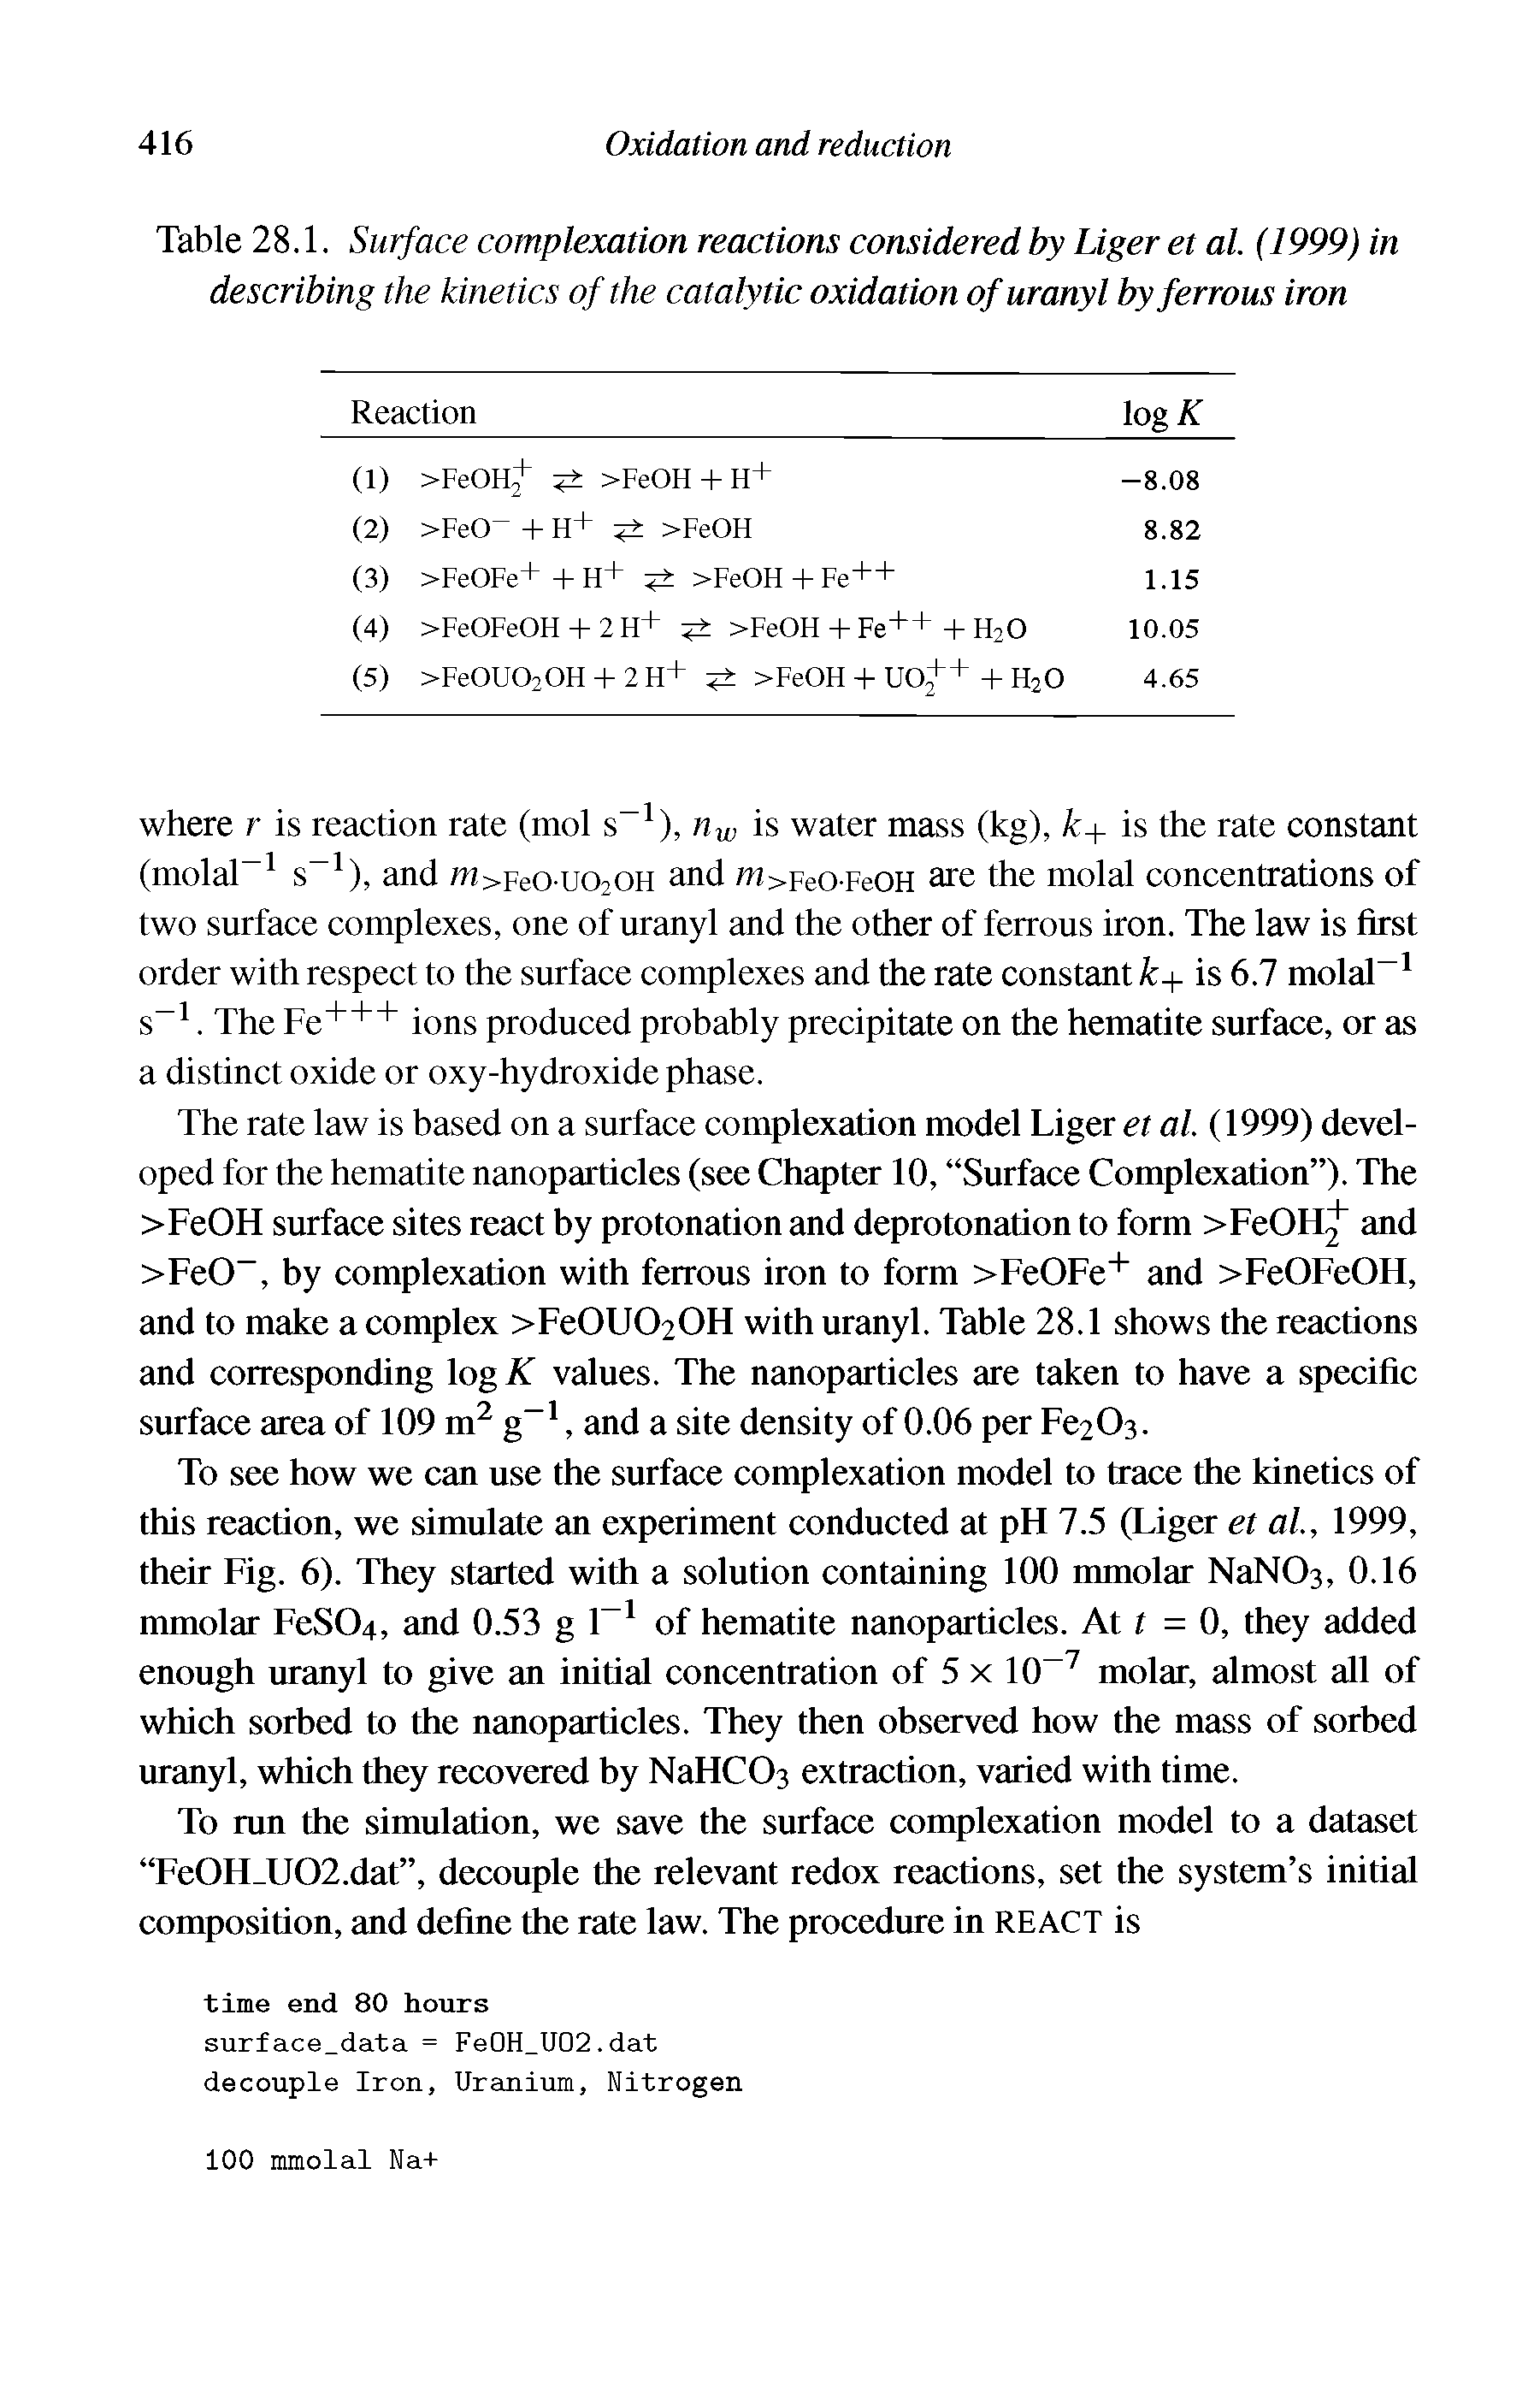 Table 28.1. Surface complexation reactions considered by Liger et al. (1999) in describing the kinetics of the catalytic oxidation ofuranyl by ferrous iron...